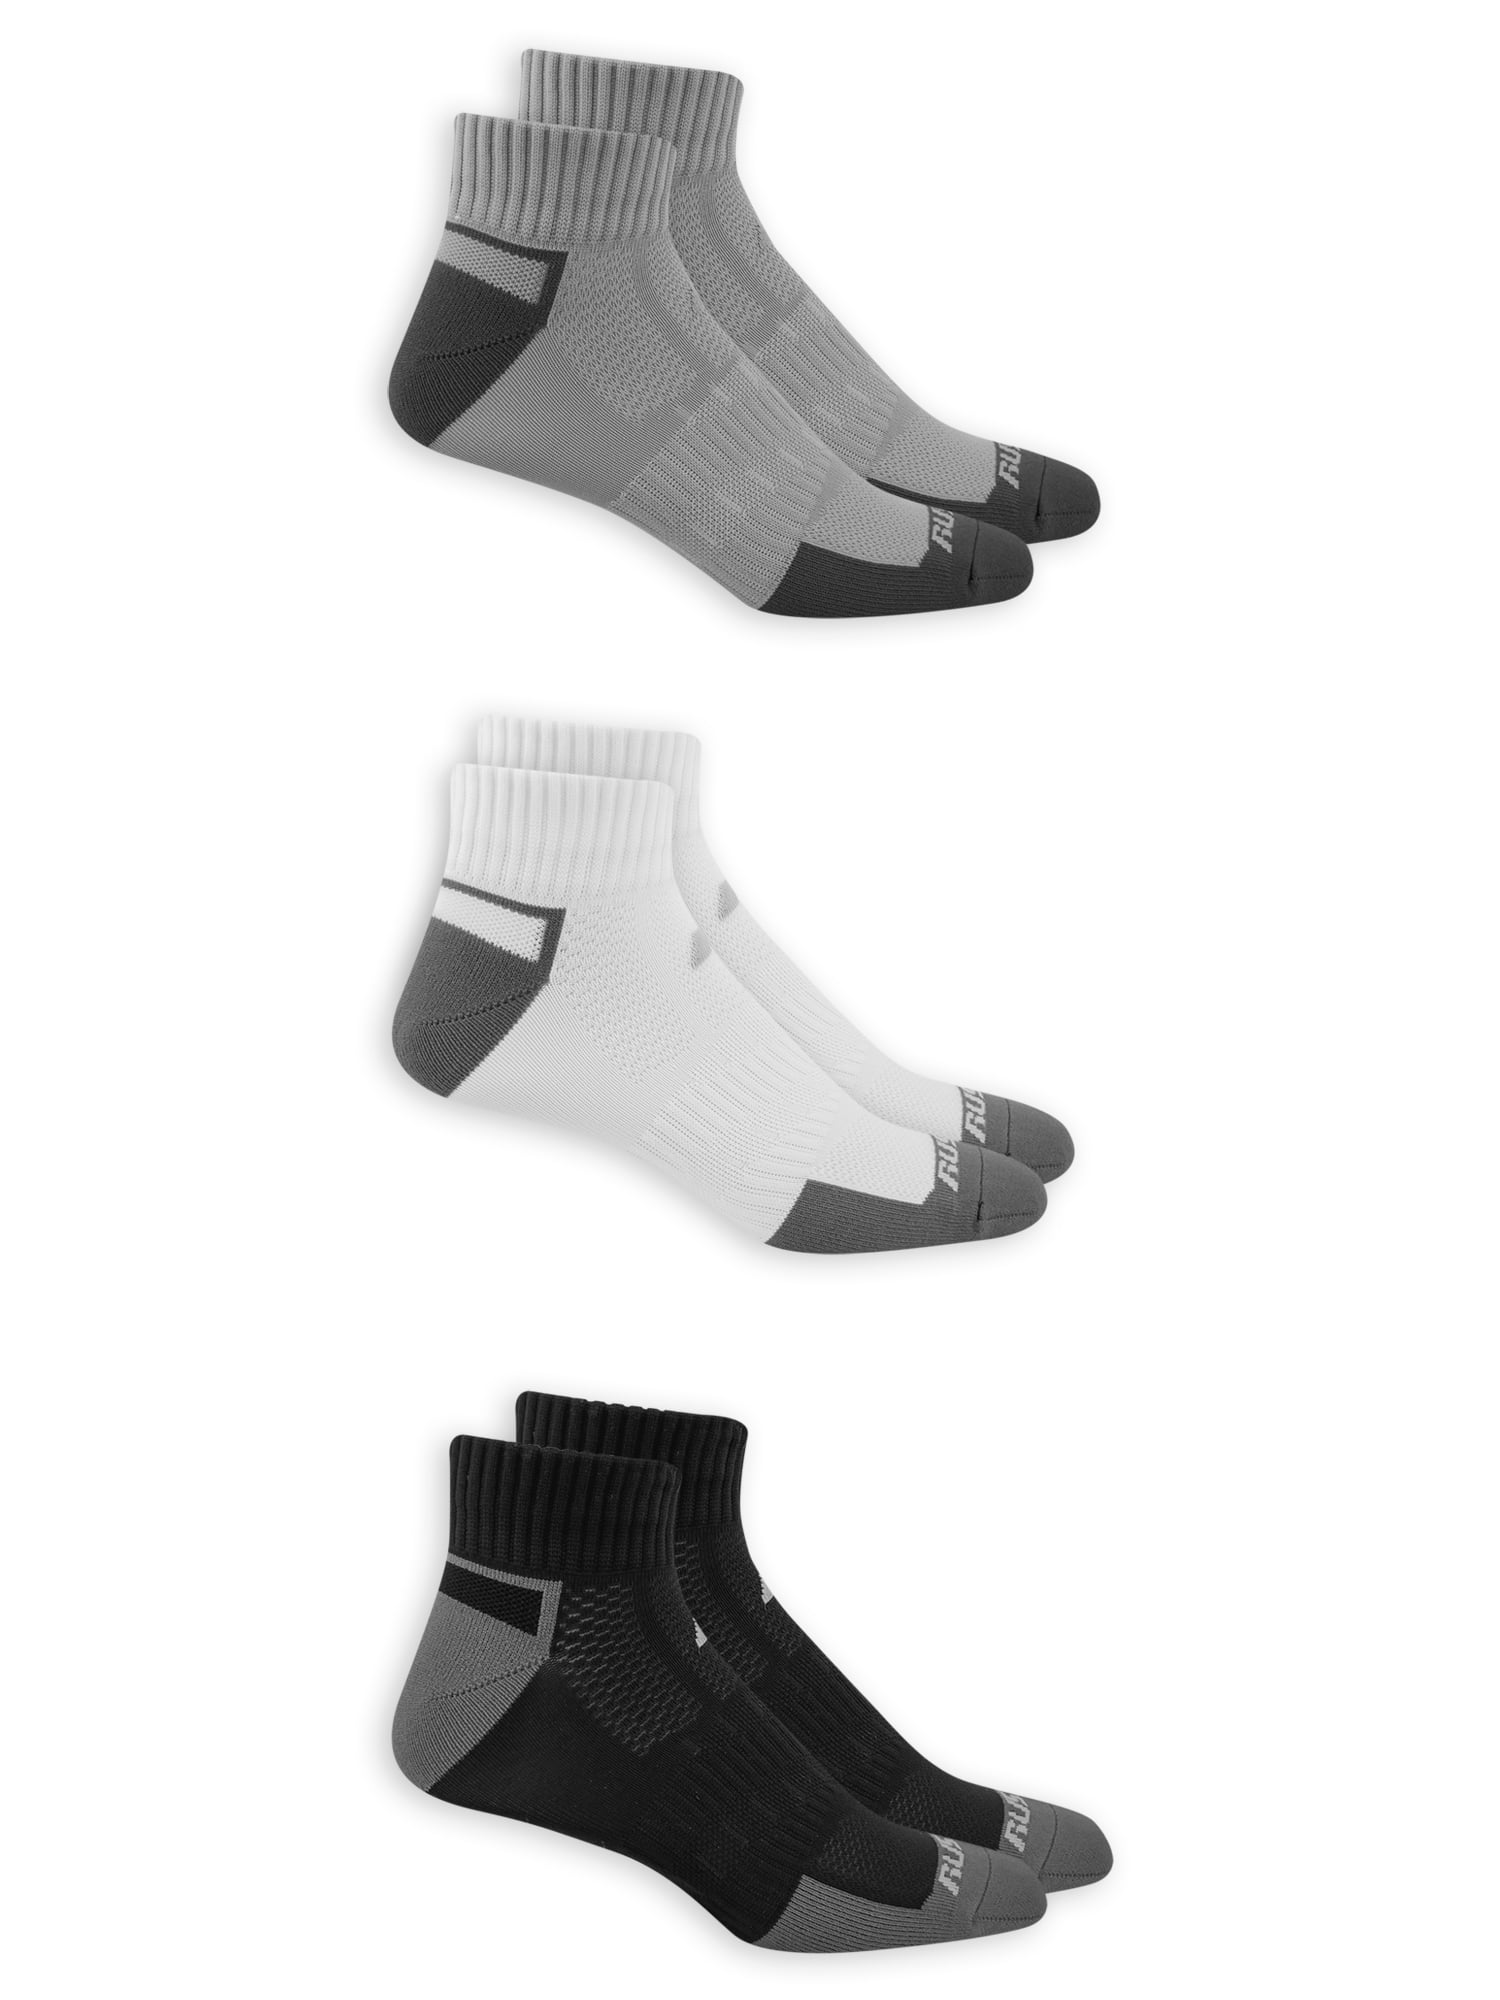 3 pair pack of men's black sports socks from Russell Athletic size 9-12 uk new 